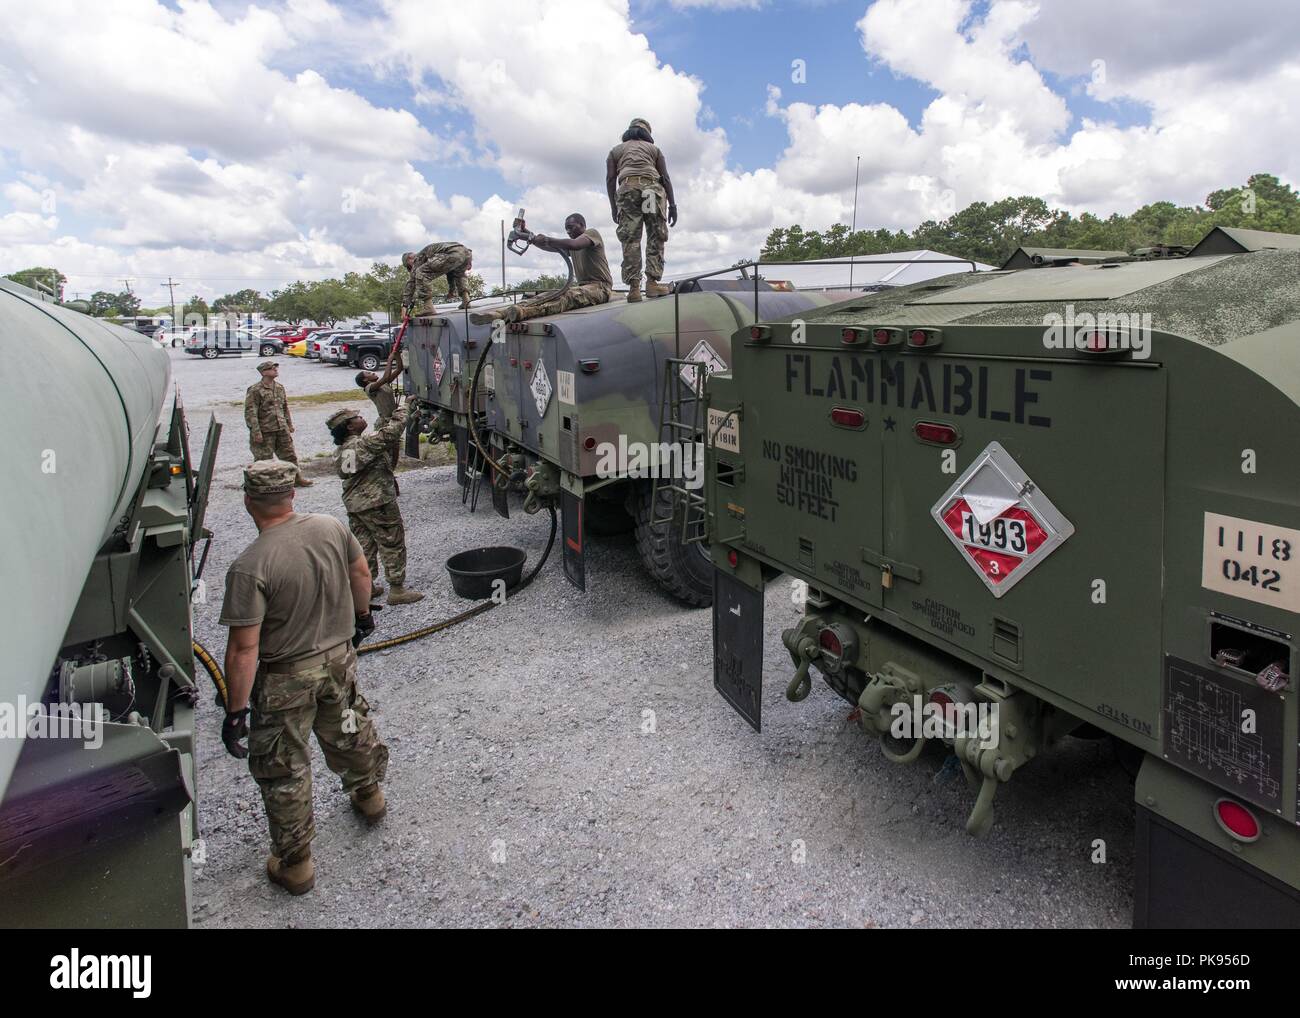 South Carolina National Guard Soldiers from the 118th Forward Support Company transfer bulk diesel fuel into M987 HEMTT fuel tanker trucks for distribution in preparation to support partnered civilian agencies and safeguard the citizens of the state in advance of Hurricane Florence, September 10, 2018, September 10, 2018. Approximately 1600 Soldiers and Airmen have been mobilized to prepare, respond and participate in recovery efforts as forecasters project Hurricane Florence will increase in strength with potential to be a Category 4 storm and a projected path to make landfall near the Caroli Stock Photo